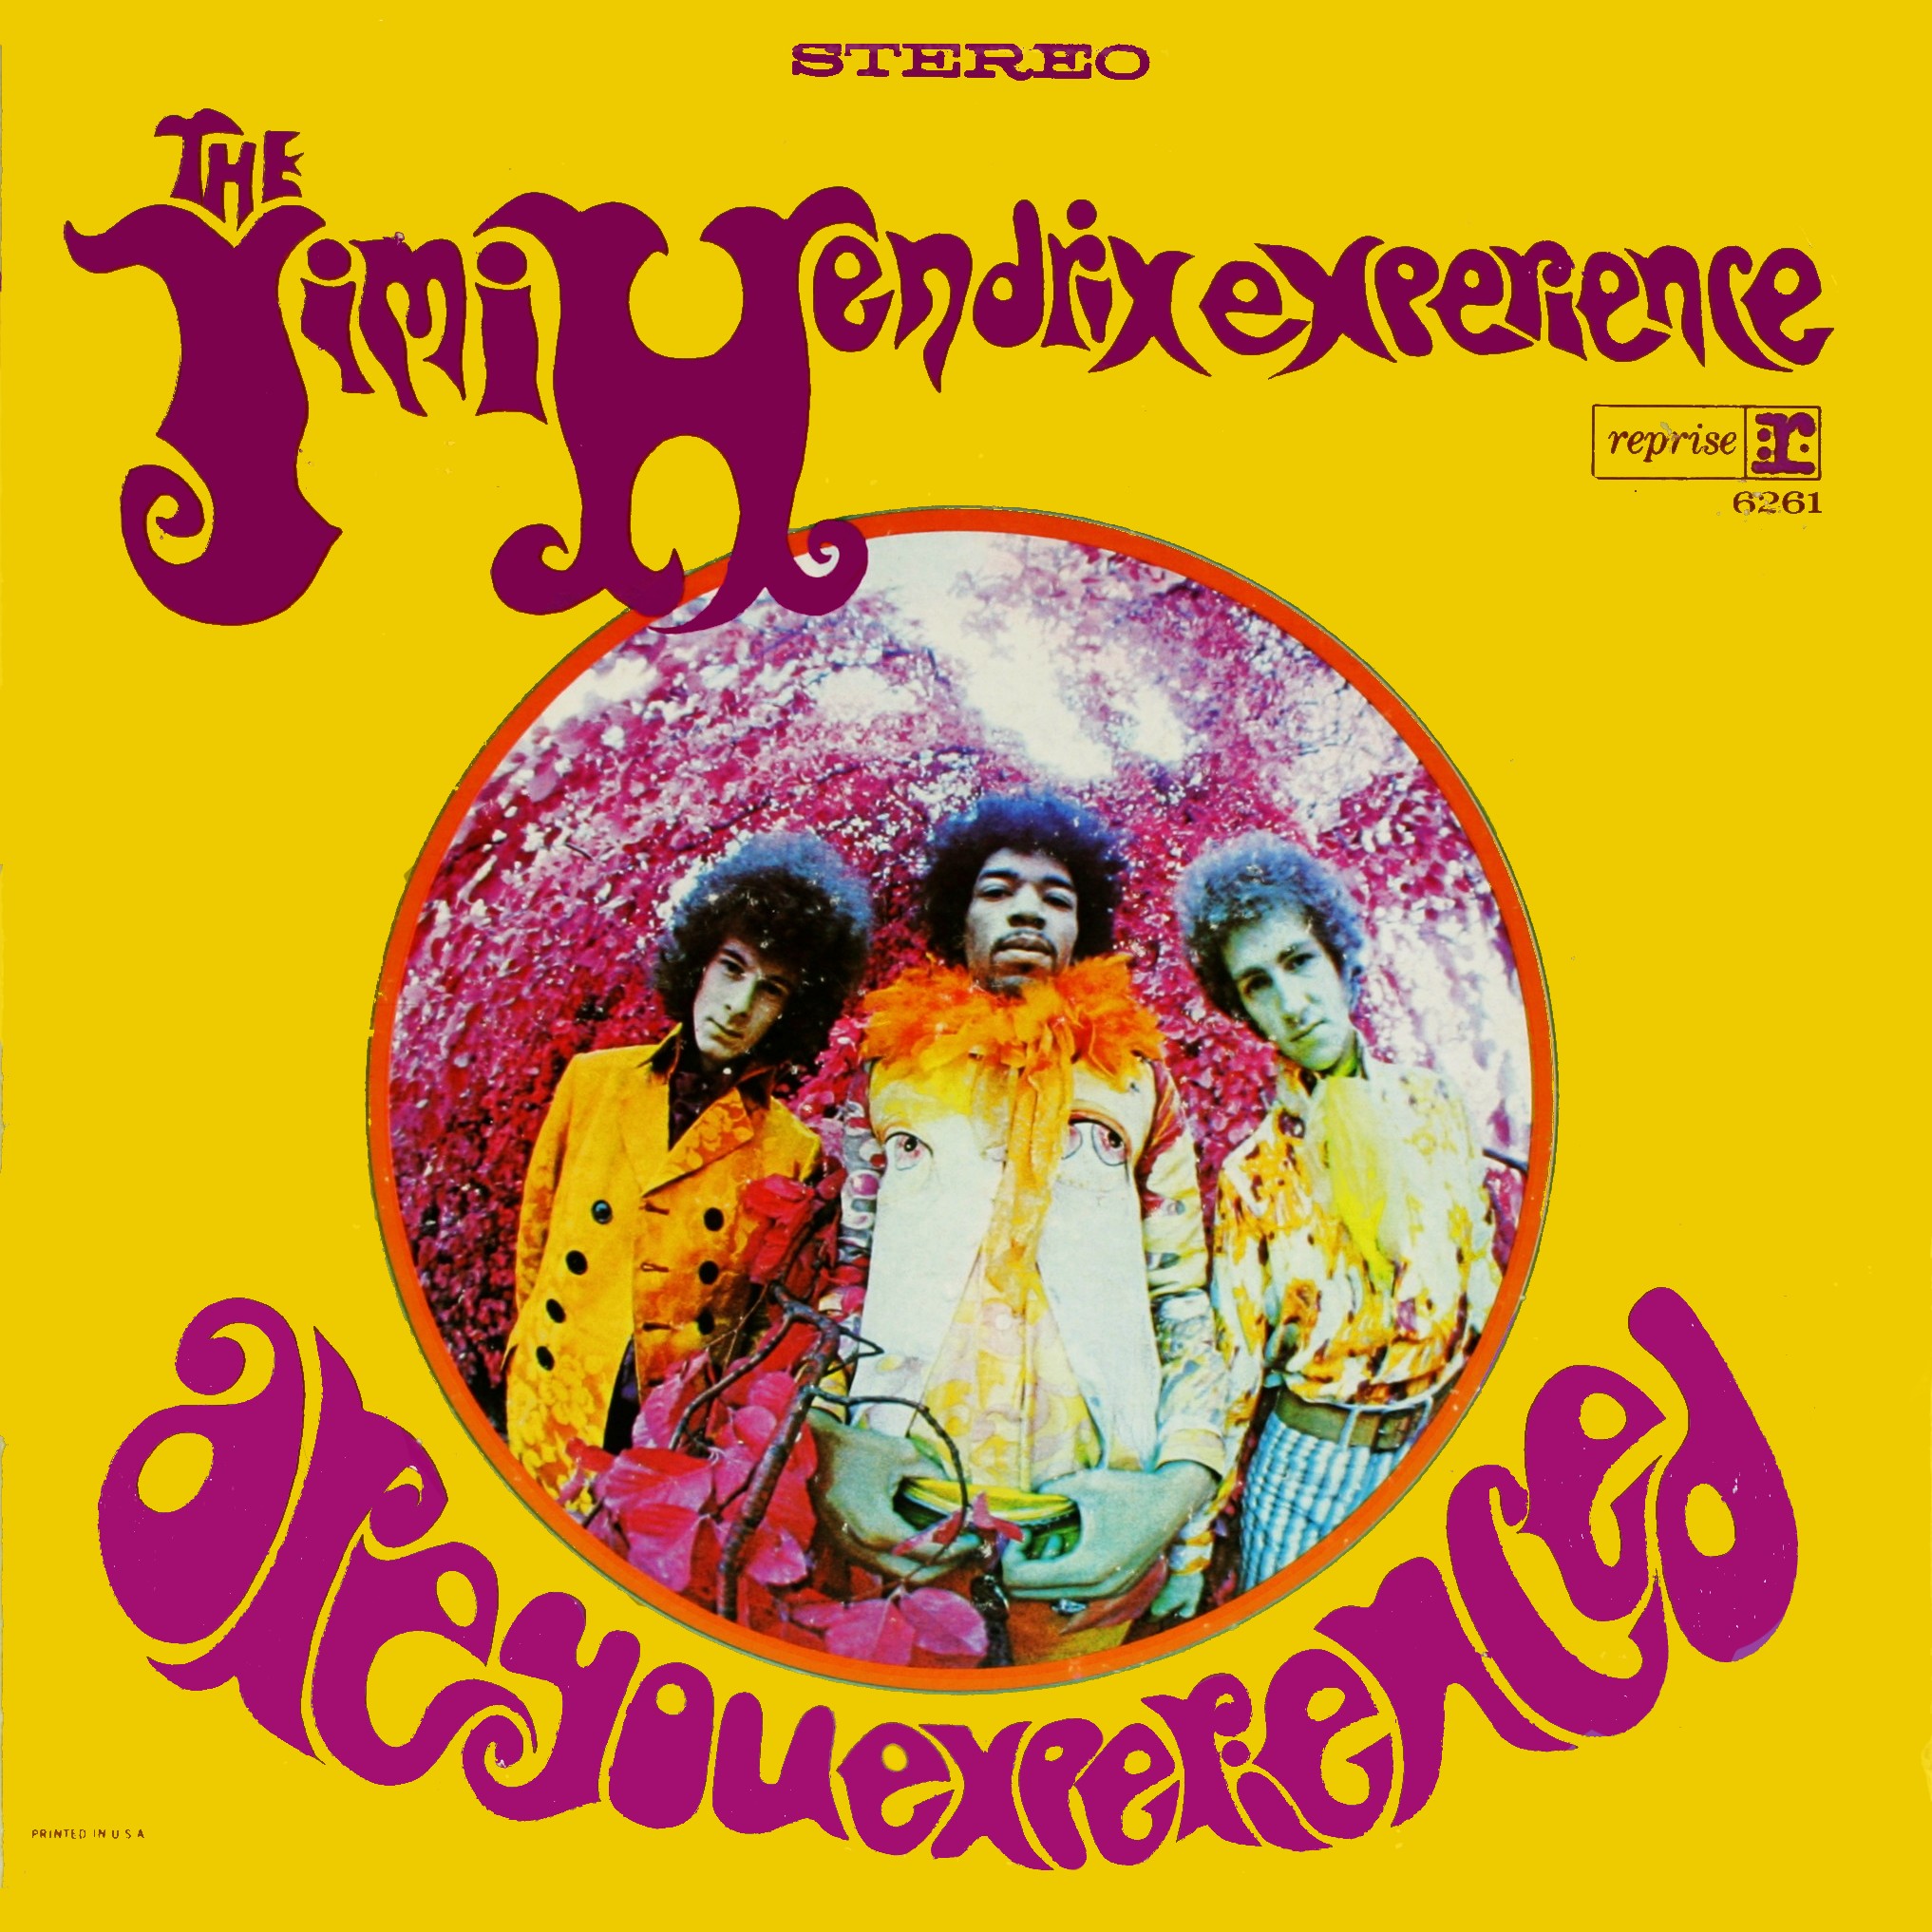 The Jimi Hendrix Experience: Are You Experienced?